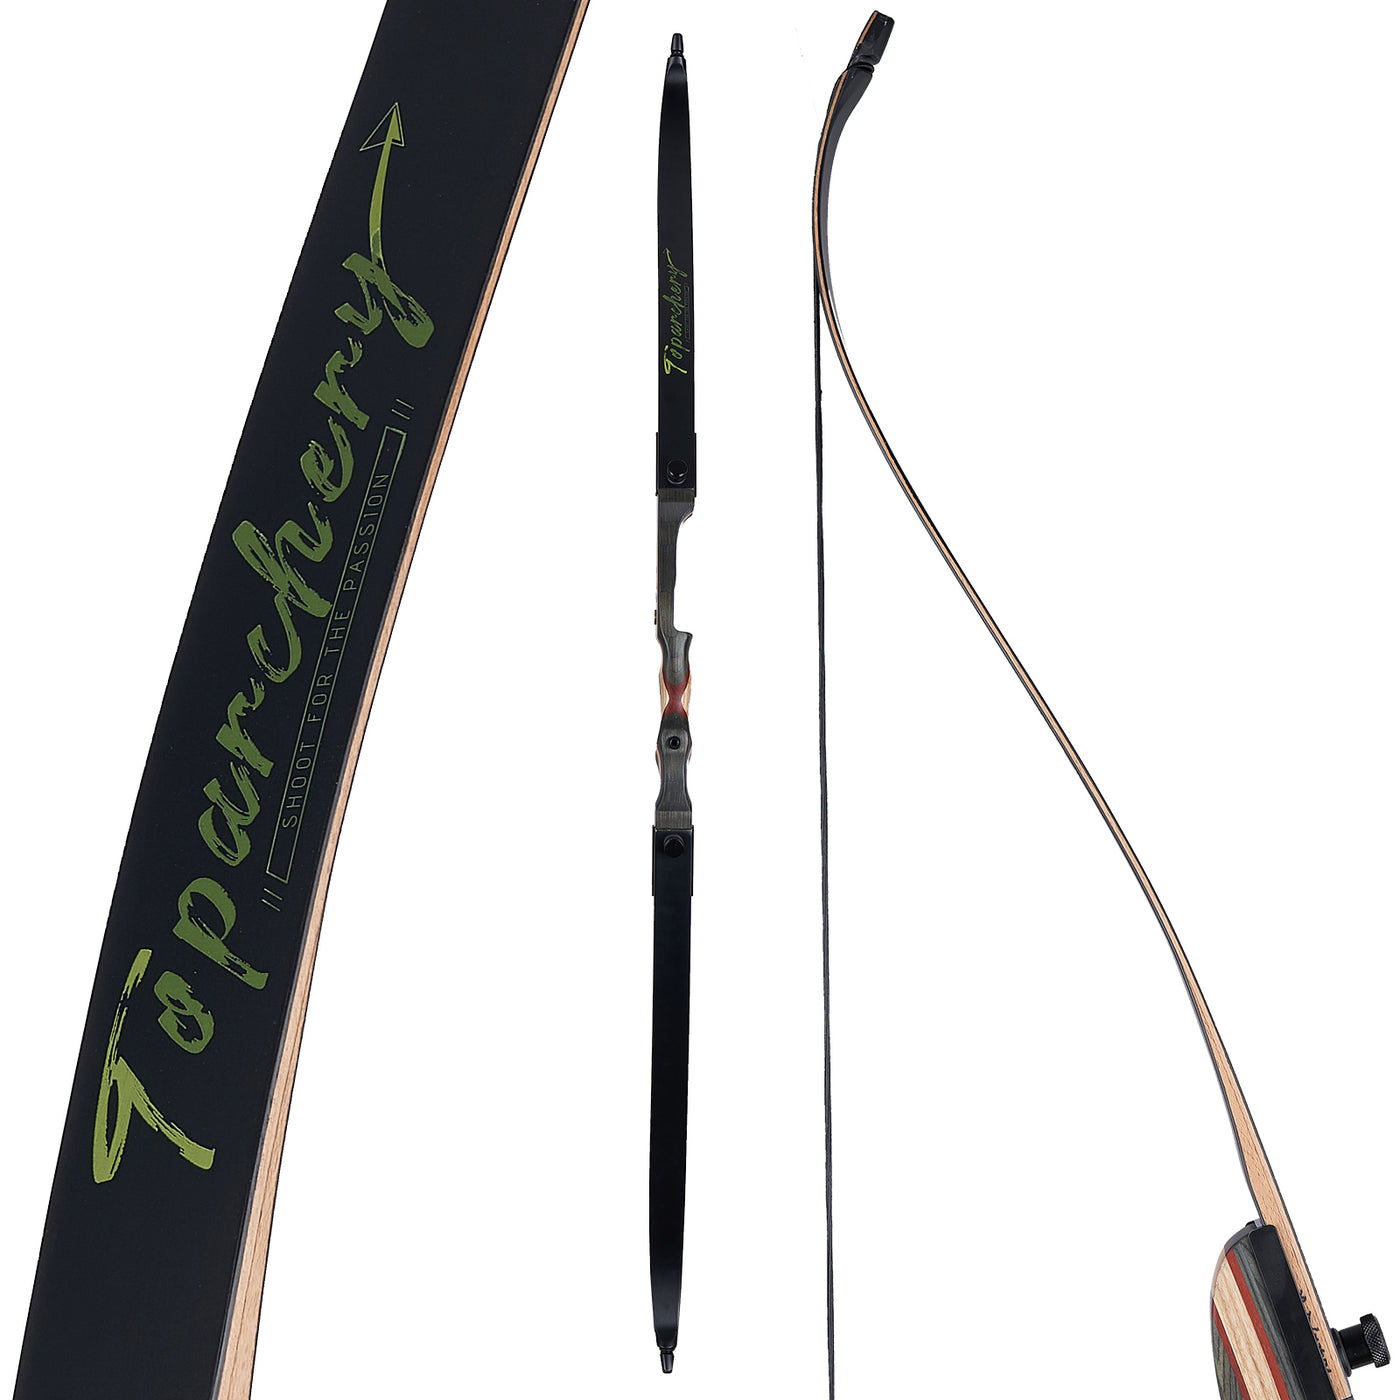 Goblin 62" TopArchery Takedown Recurve Bow Archery for Hunting Targeting Shooting Adults & Youth Wood Riser Laminated 20-50lbs